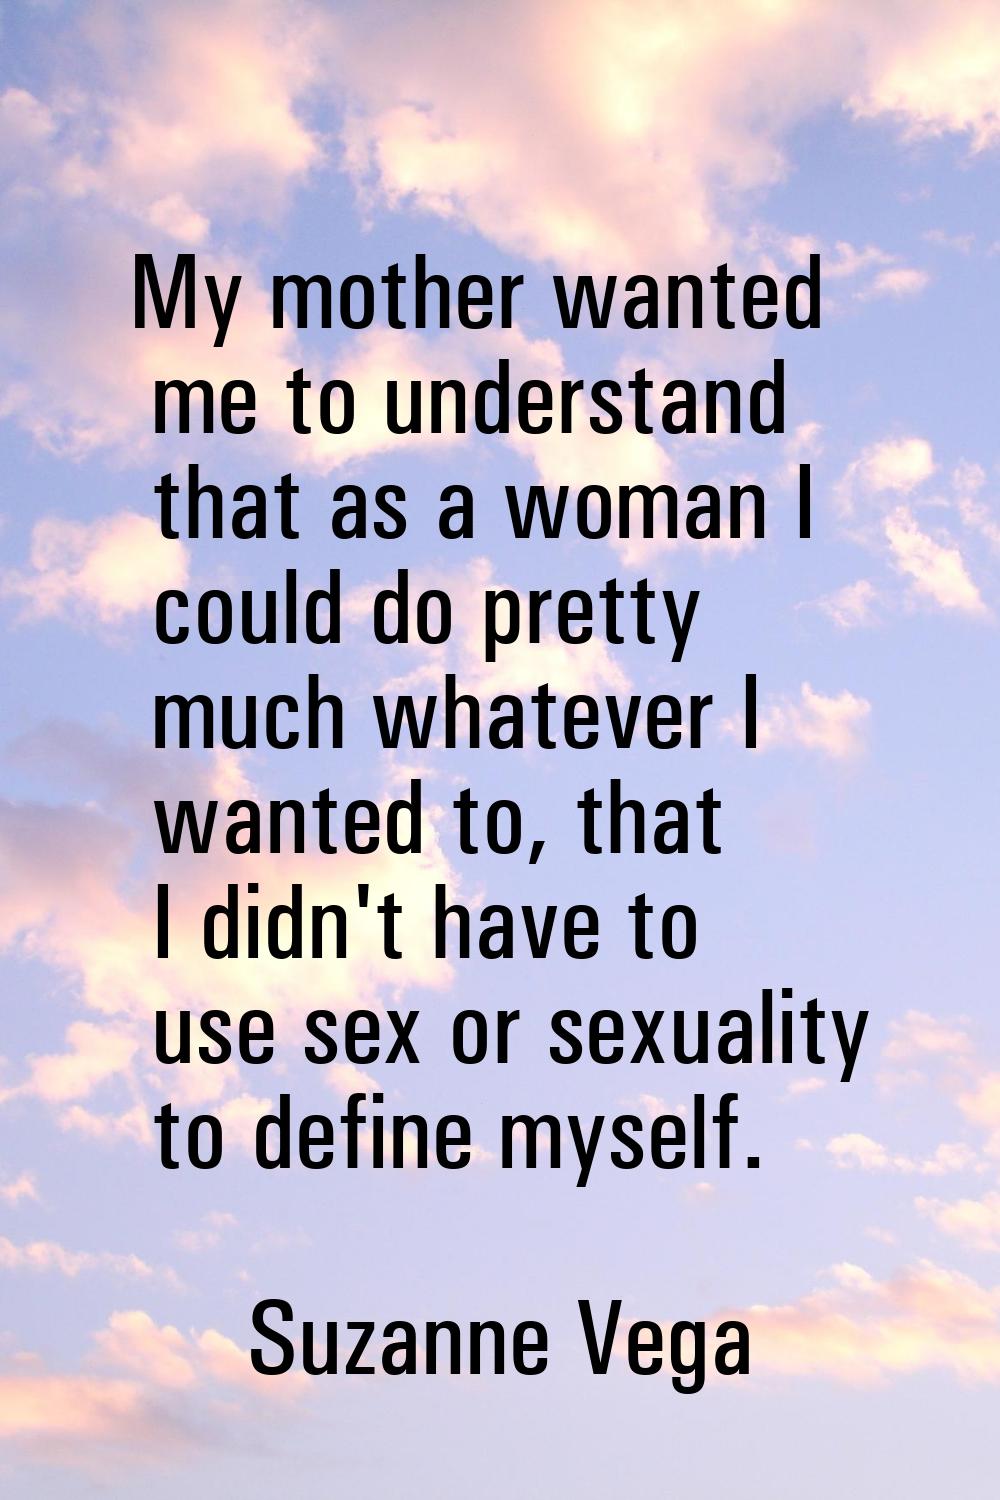 My mother wanted me to understand that as a woman I could do pretty much whatever I wanted to, that